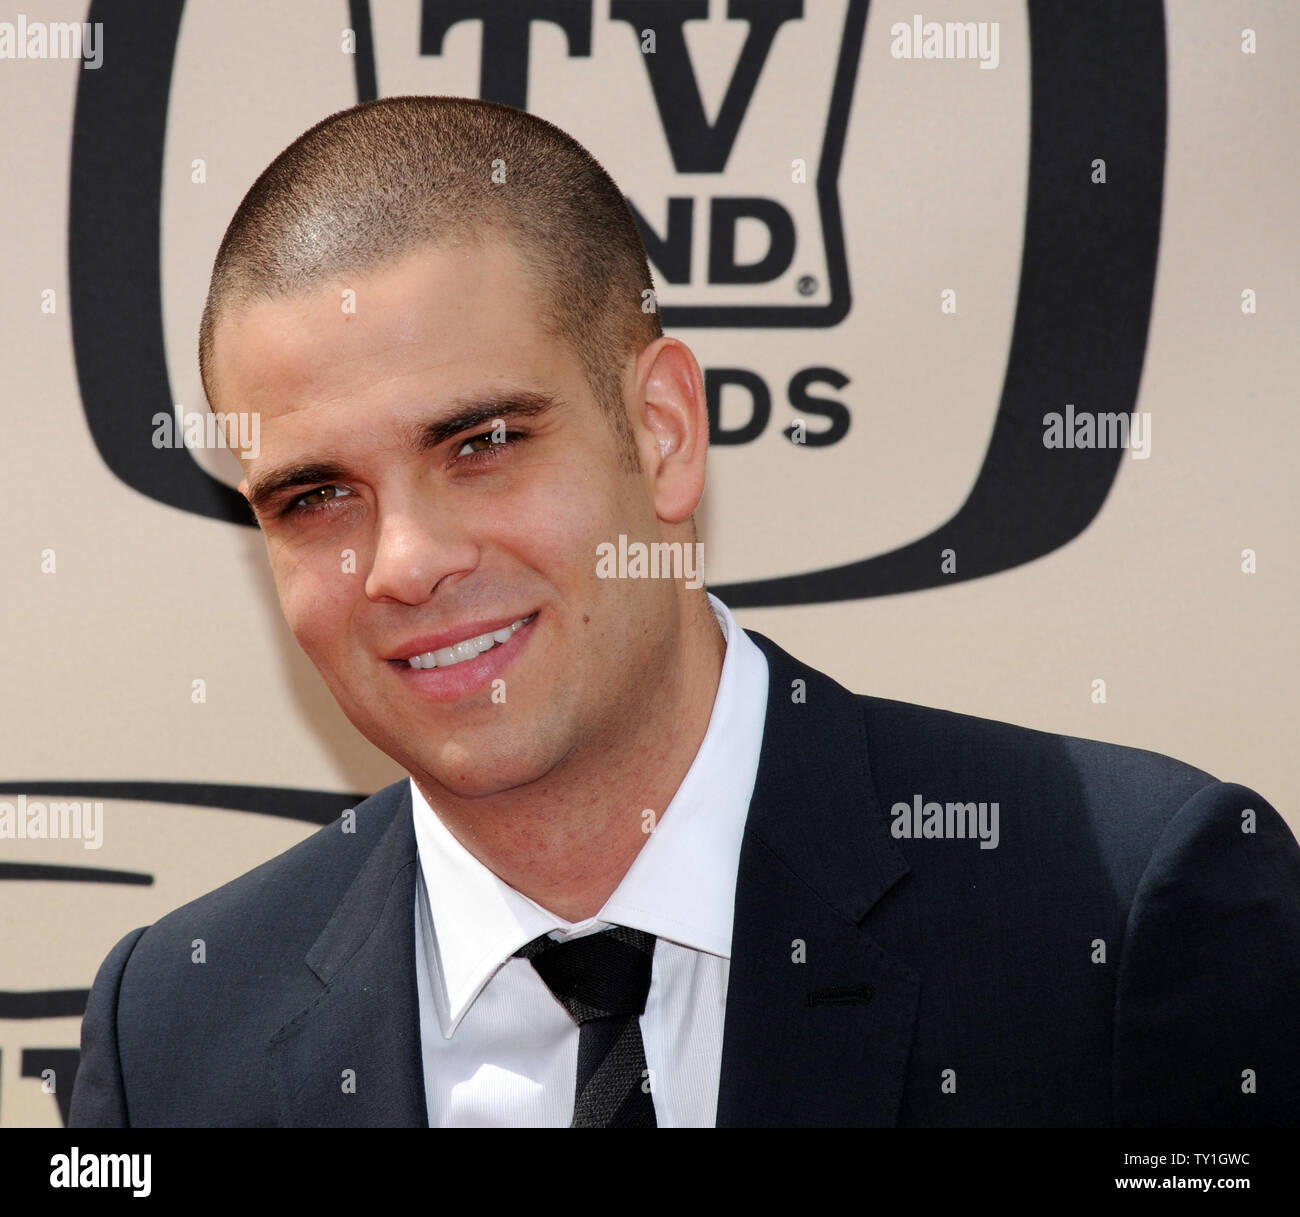 Actor Mark Salling attends the 8th annual TV Land Awards at Sony Studios in Culver City, California on April 17, 2010.   UPI/Jim Ruymen Stock Photo